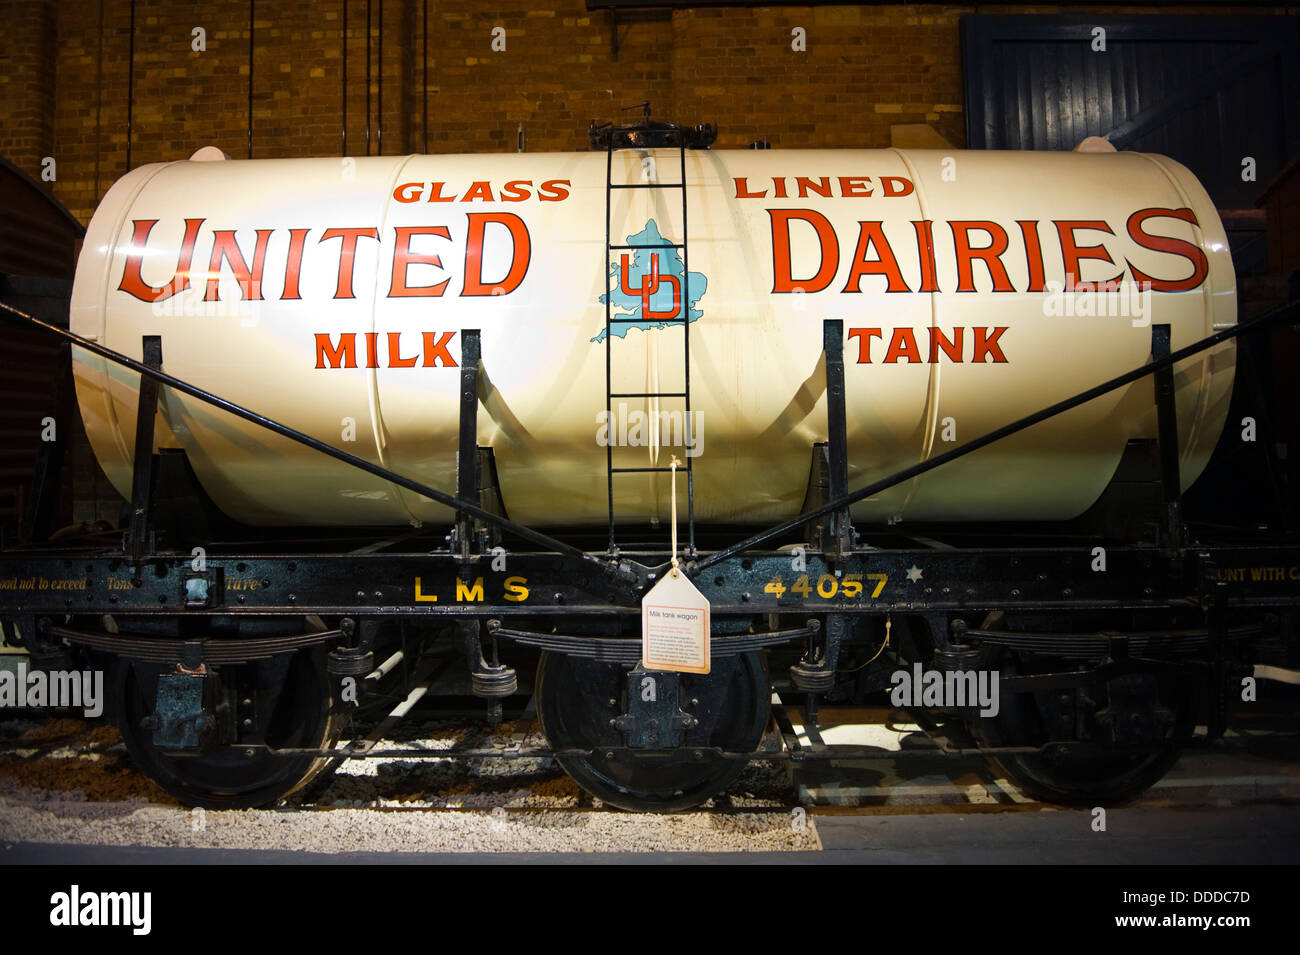 Milk tank wagon on display at the National Railway Museum in the city of York North Yorkshire England UK Stock Photo